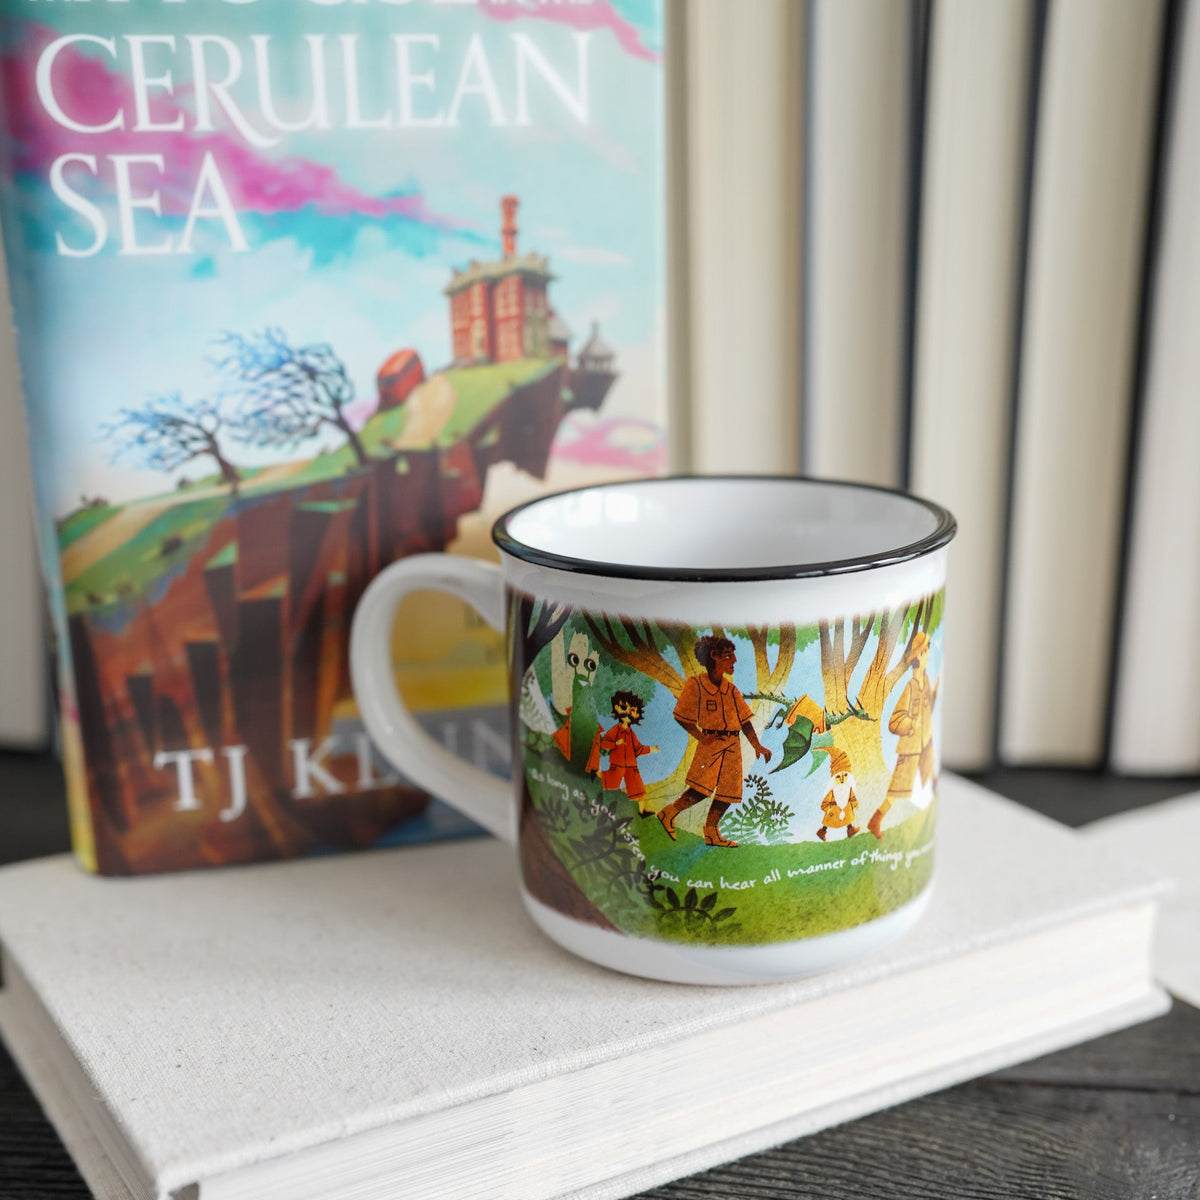 Cerulean Sea Mug has characters from T.J. Klune&#39;s book hiking on a grassy hill with the sea in background.